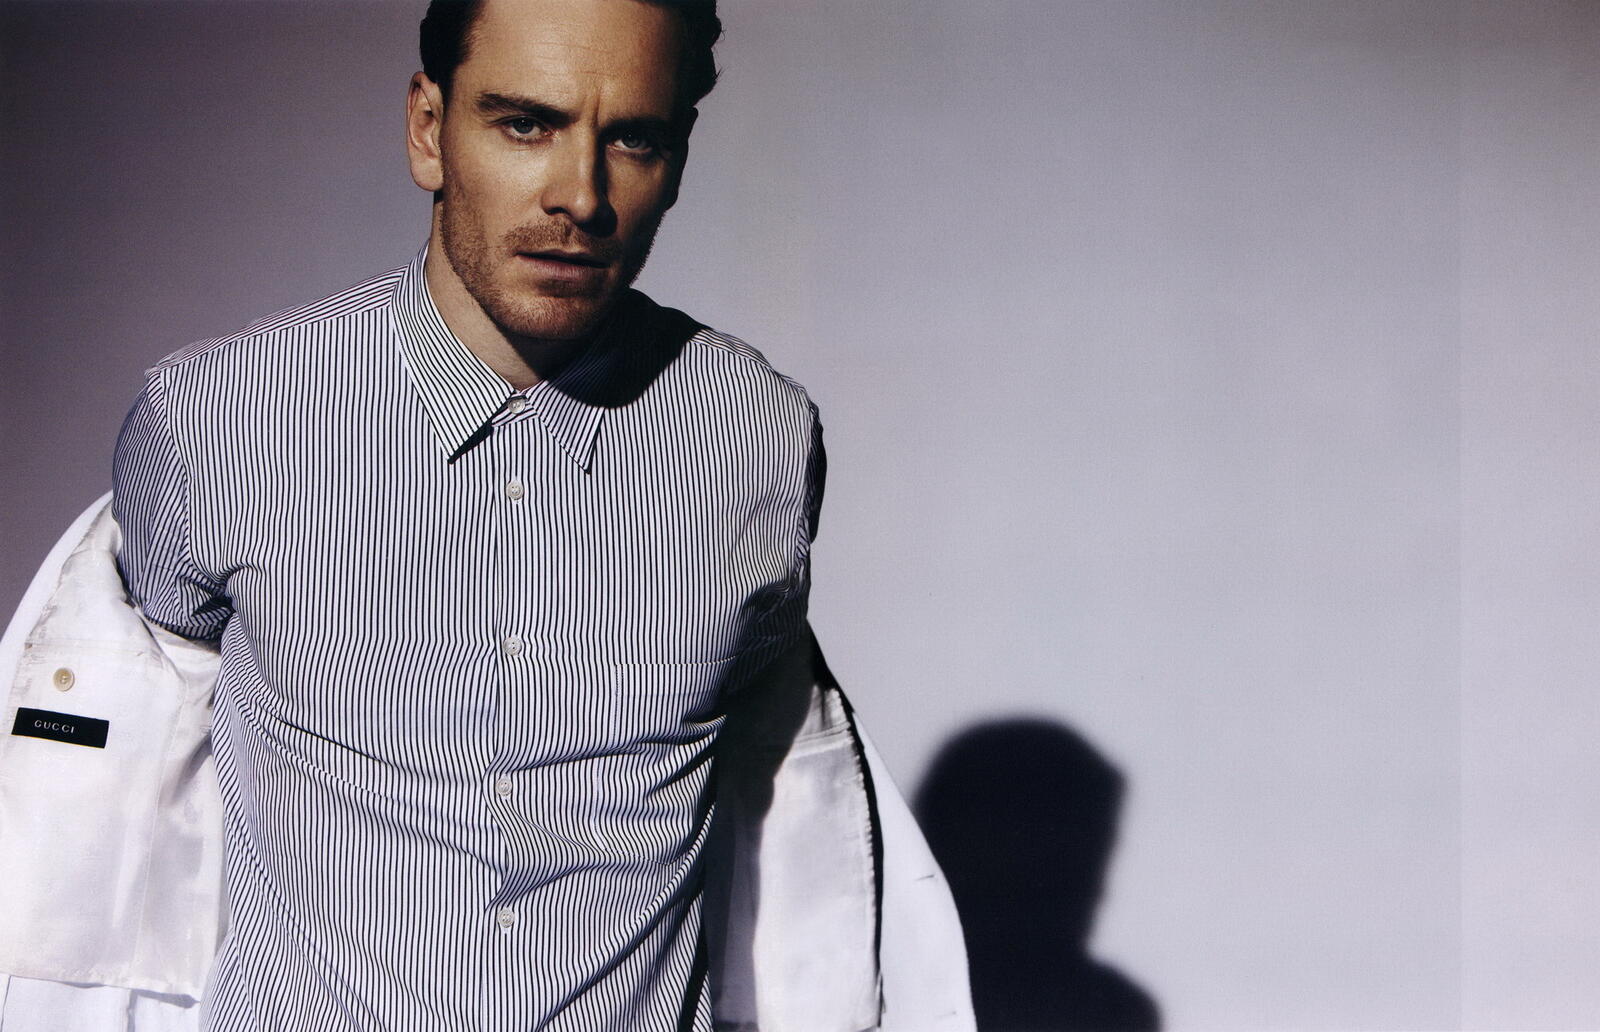 Wallpapers michael fassbender actor gucci on the desktop